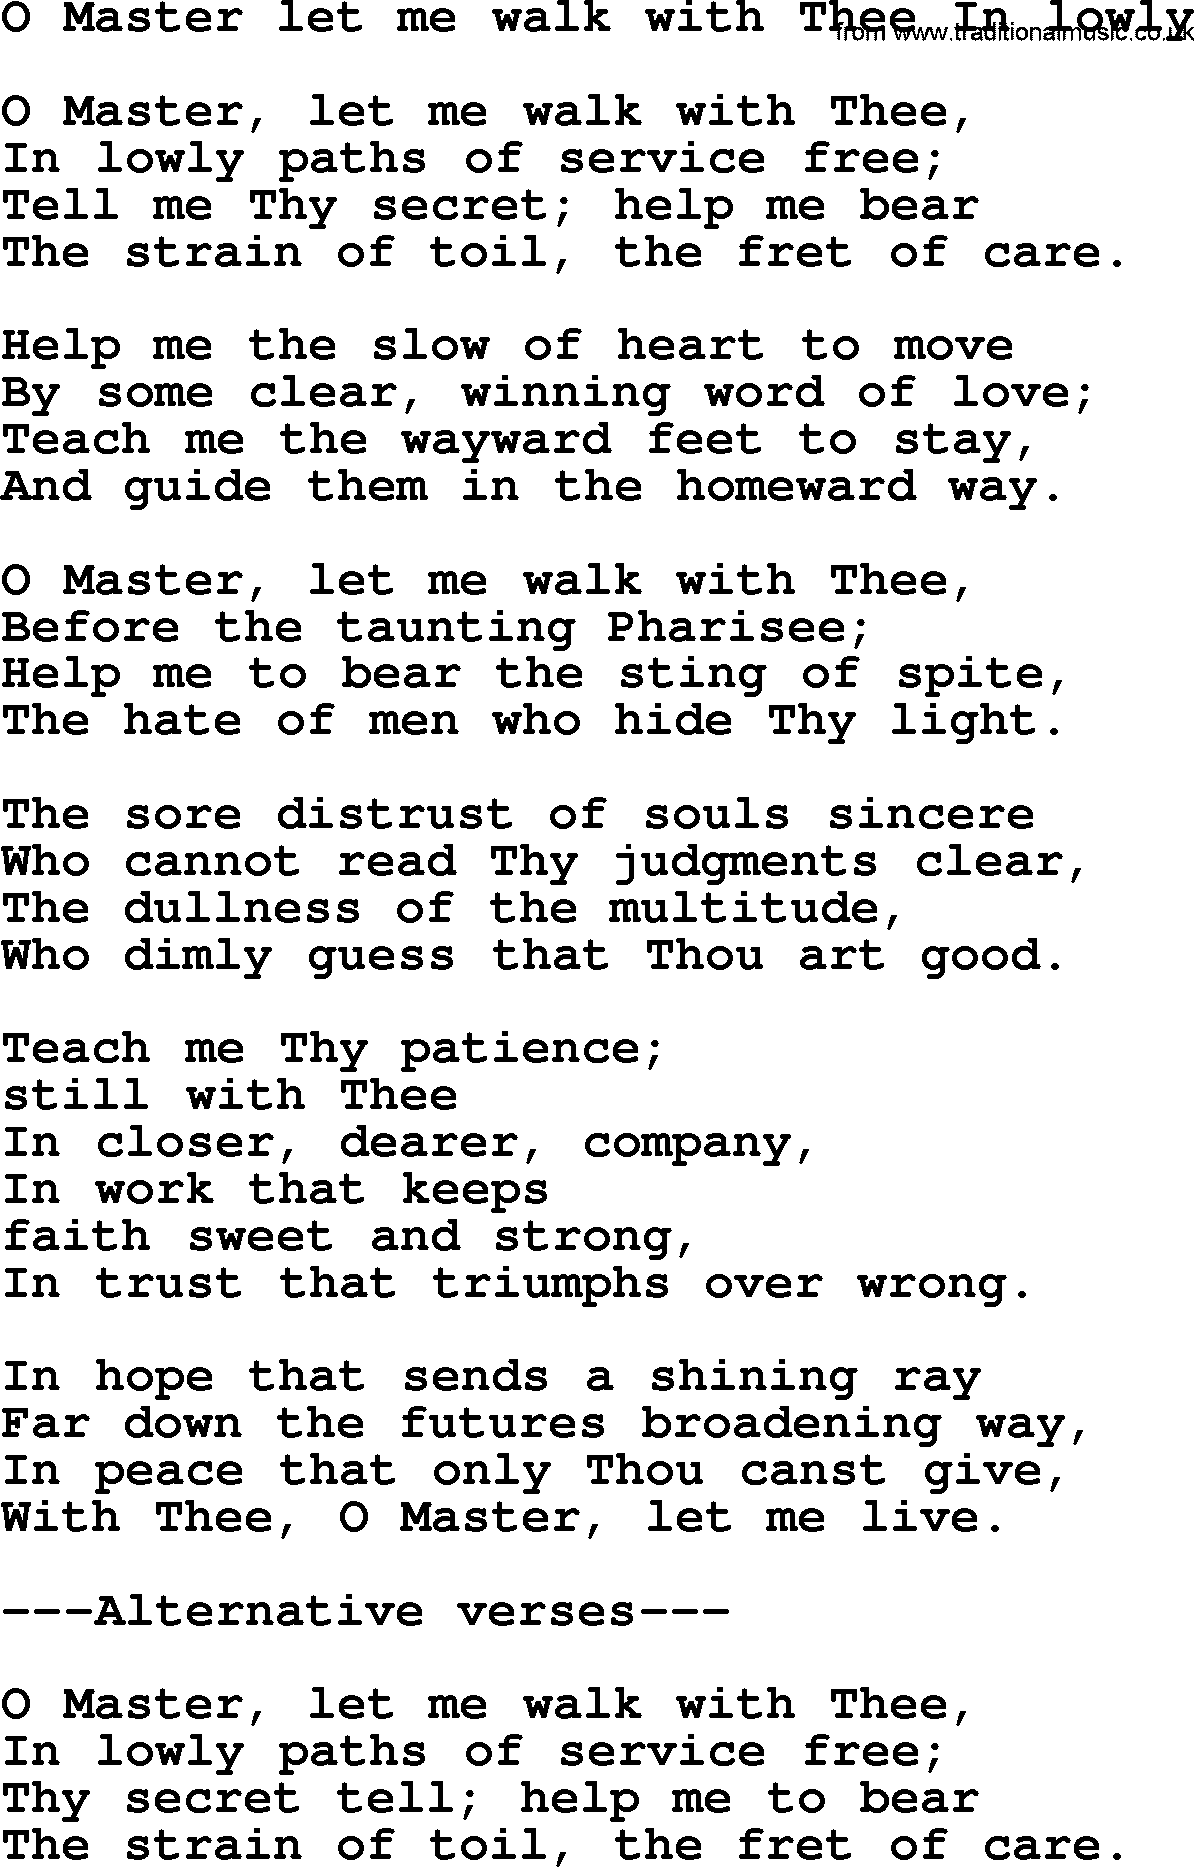 Presbyterian Hymns collection, Hymn: O Master Let Me Walk With Thee In Lowly, lyrics and PDF